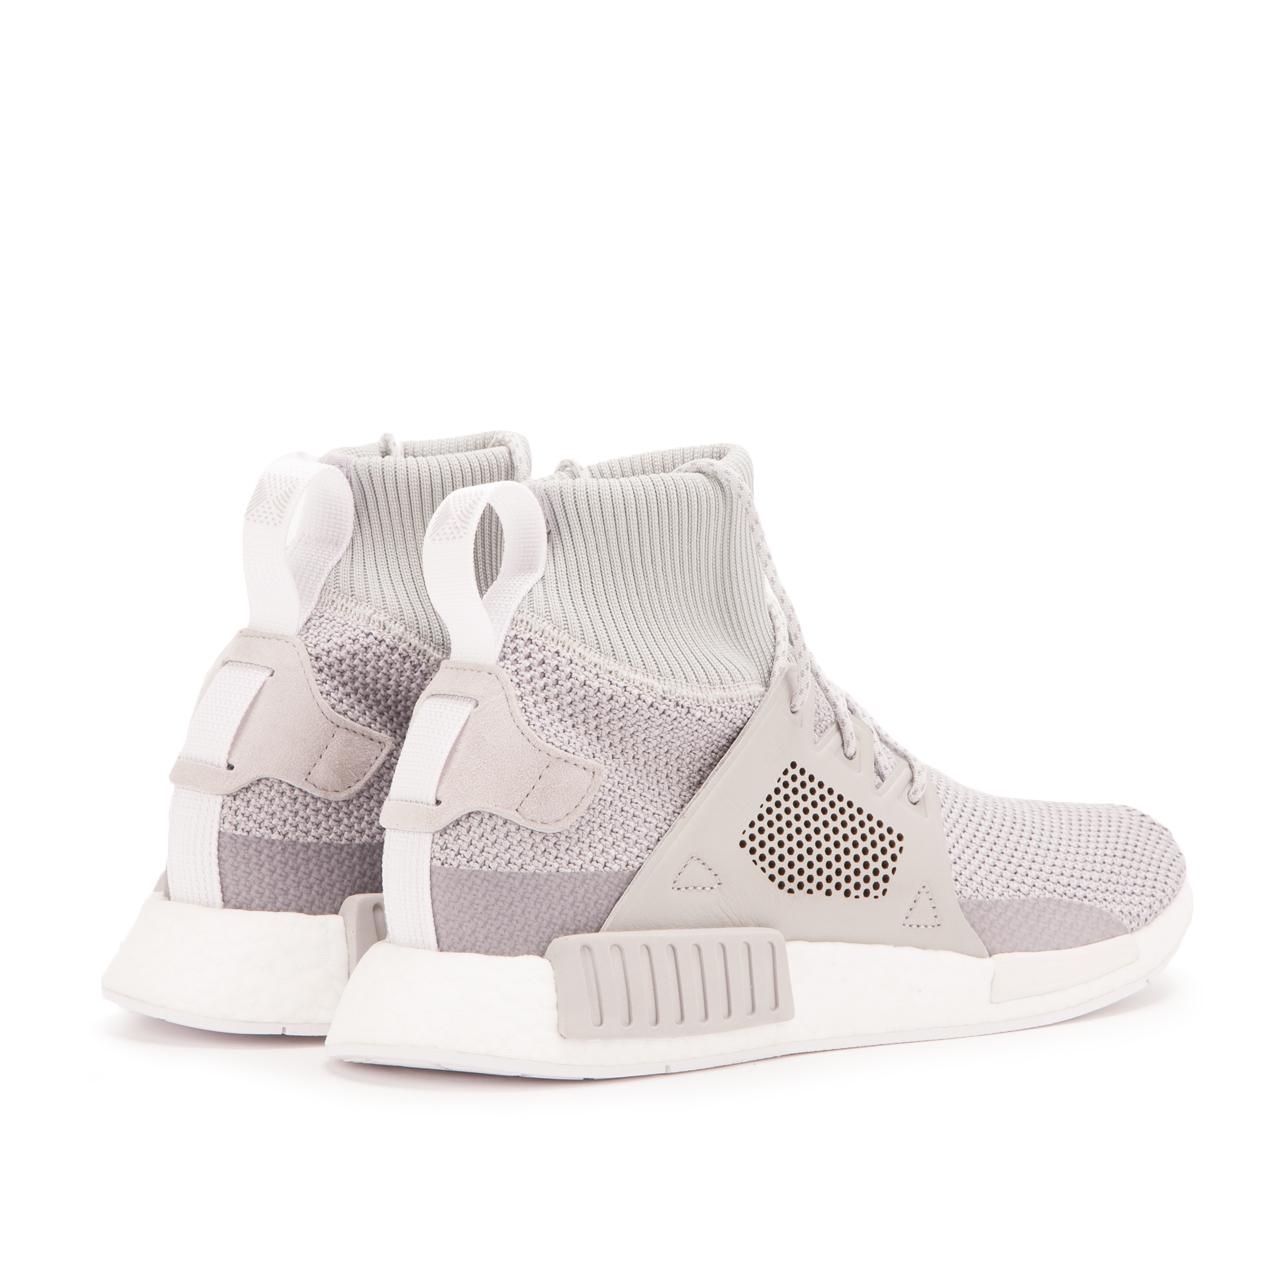 adidas Rubber Nmd-xr1 Winter in Grey (Gray) for Men - Lyst